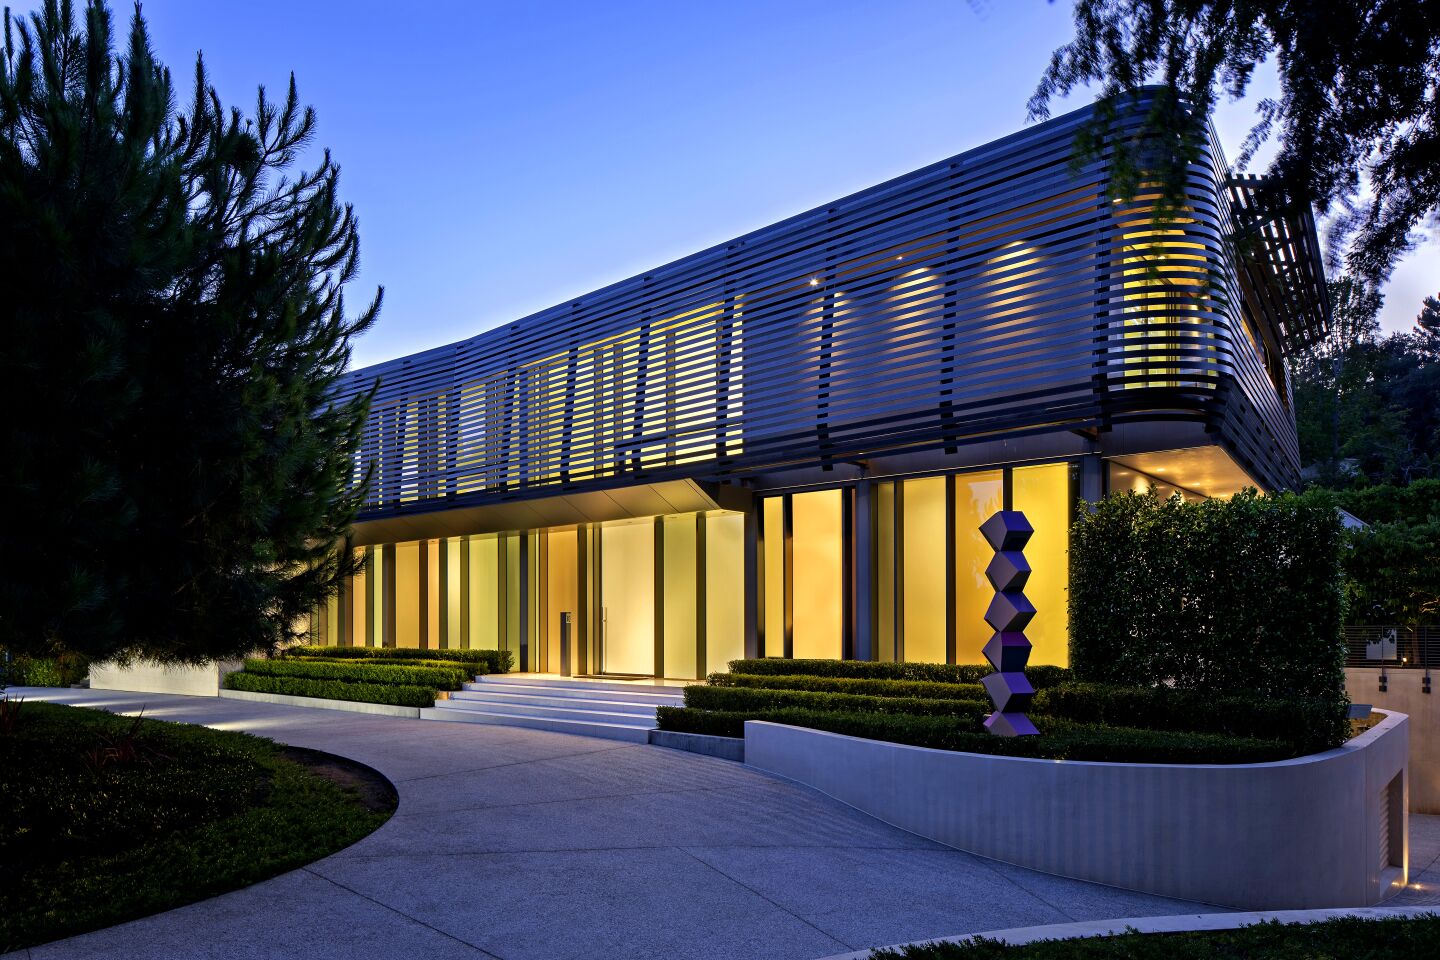 Architect William Hefner's Brise Soleil in Beverly Hills is one of the most ambitious projects featured in "California Homes II."